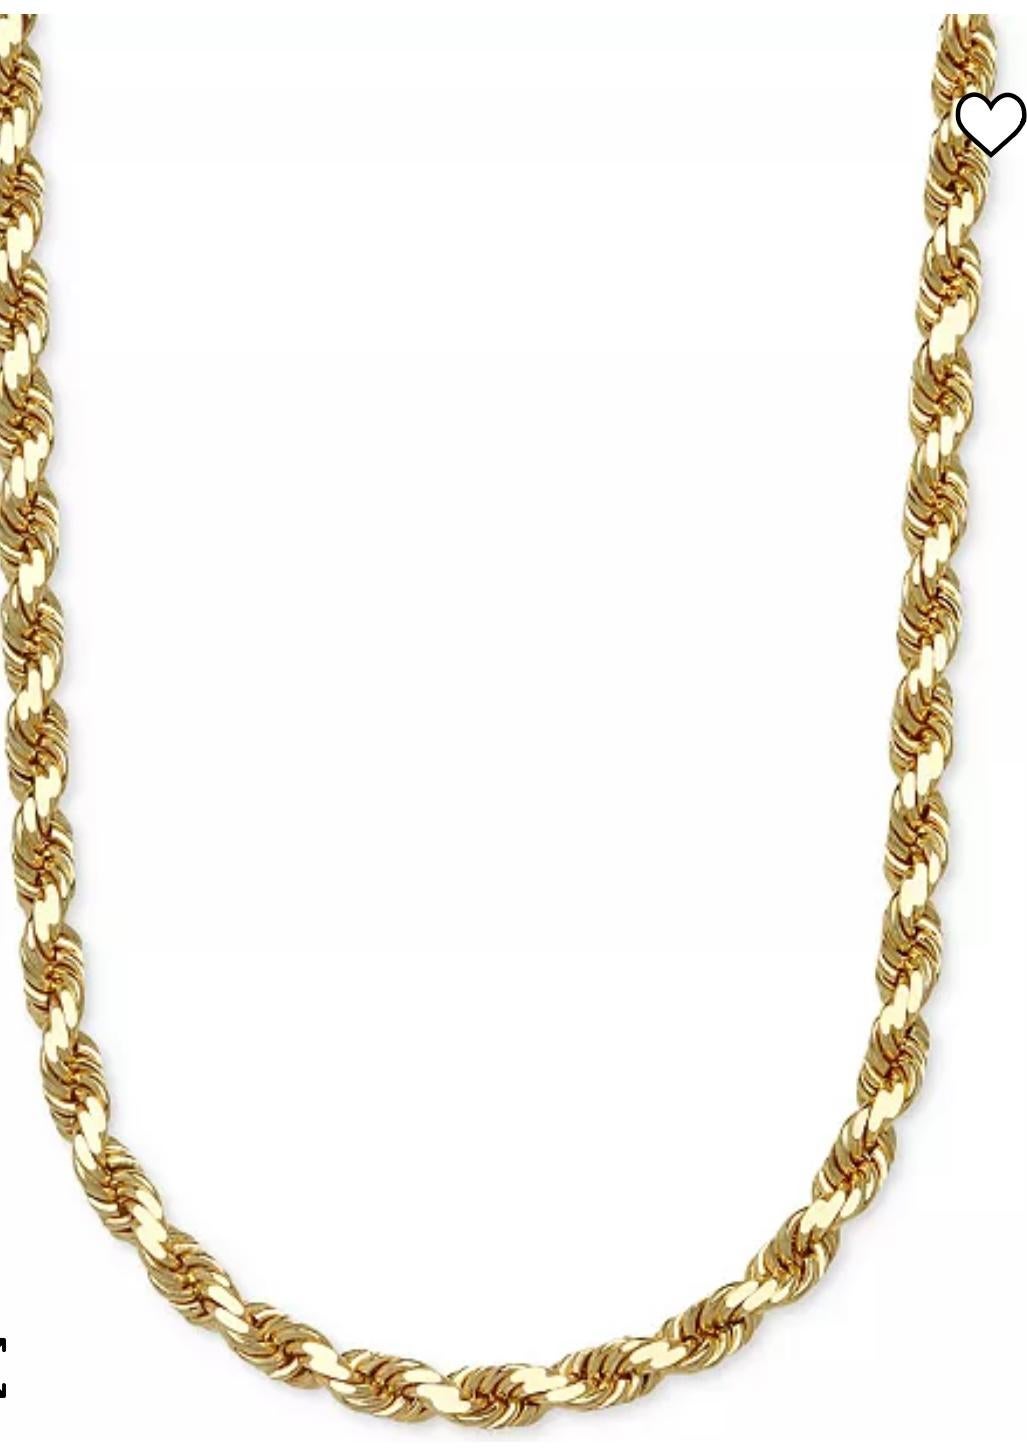 Vintage 14 Karat Yellow Gold 20.5 Gm, Rope Chain Necklace For Sale 6